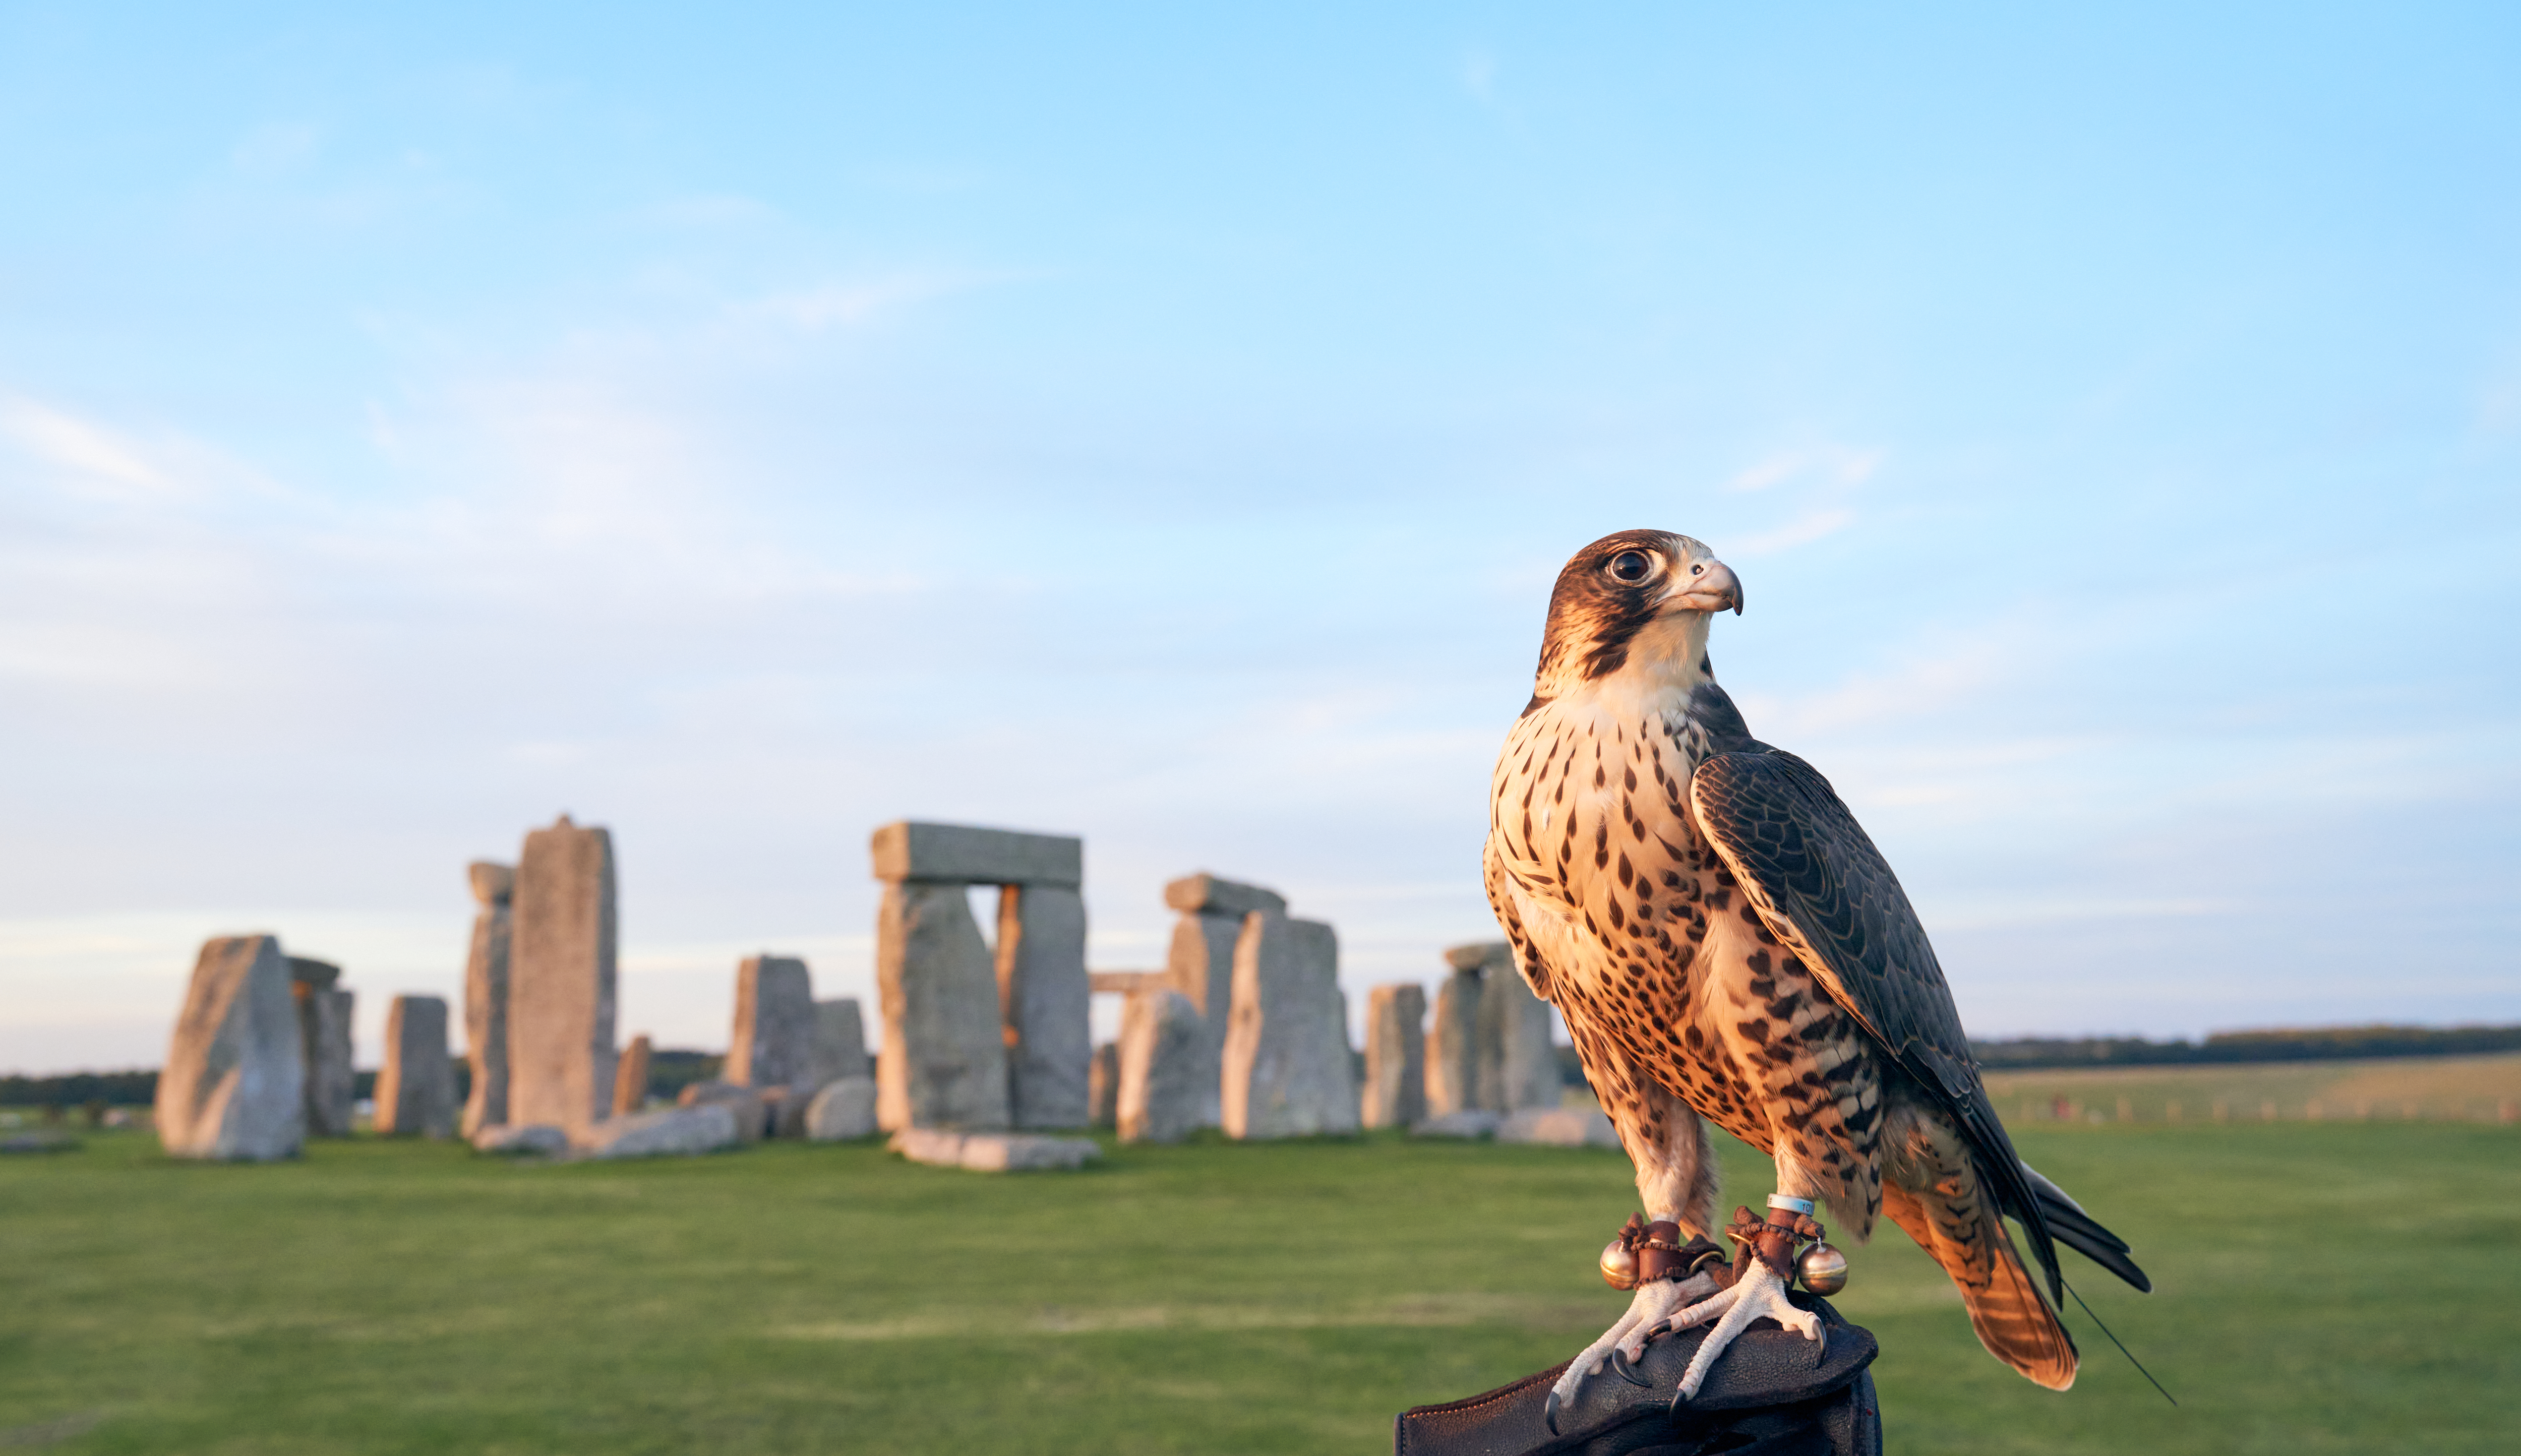 A peregrine falcon will be one of the birds on display at Stonehenge this bank holiday weekend (English Heritage/PA).